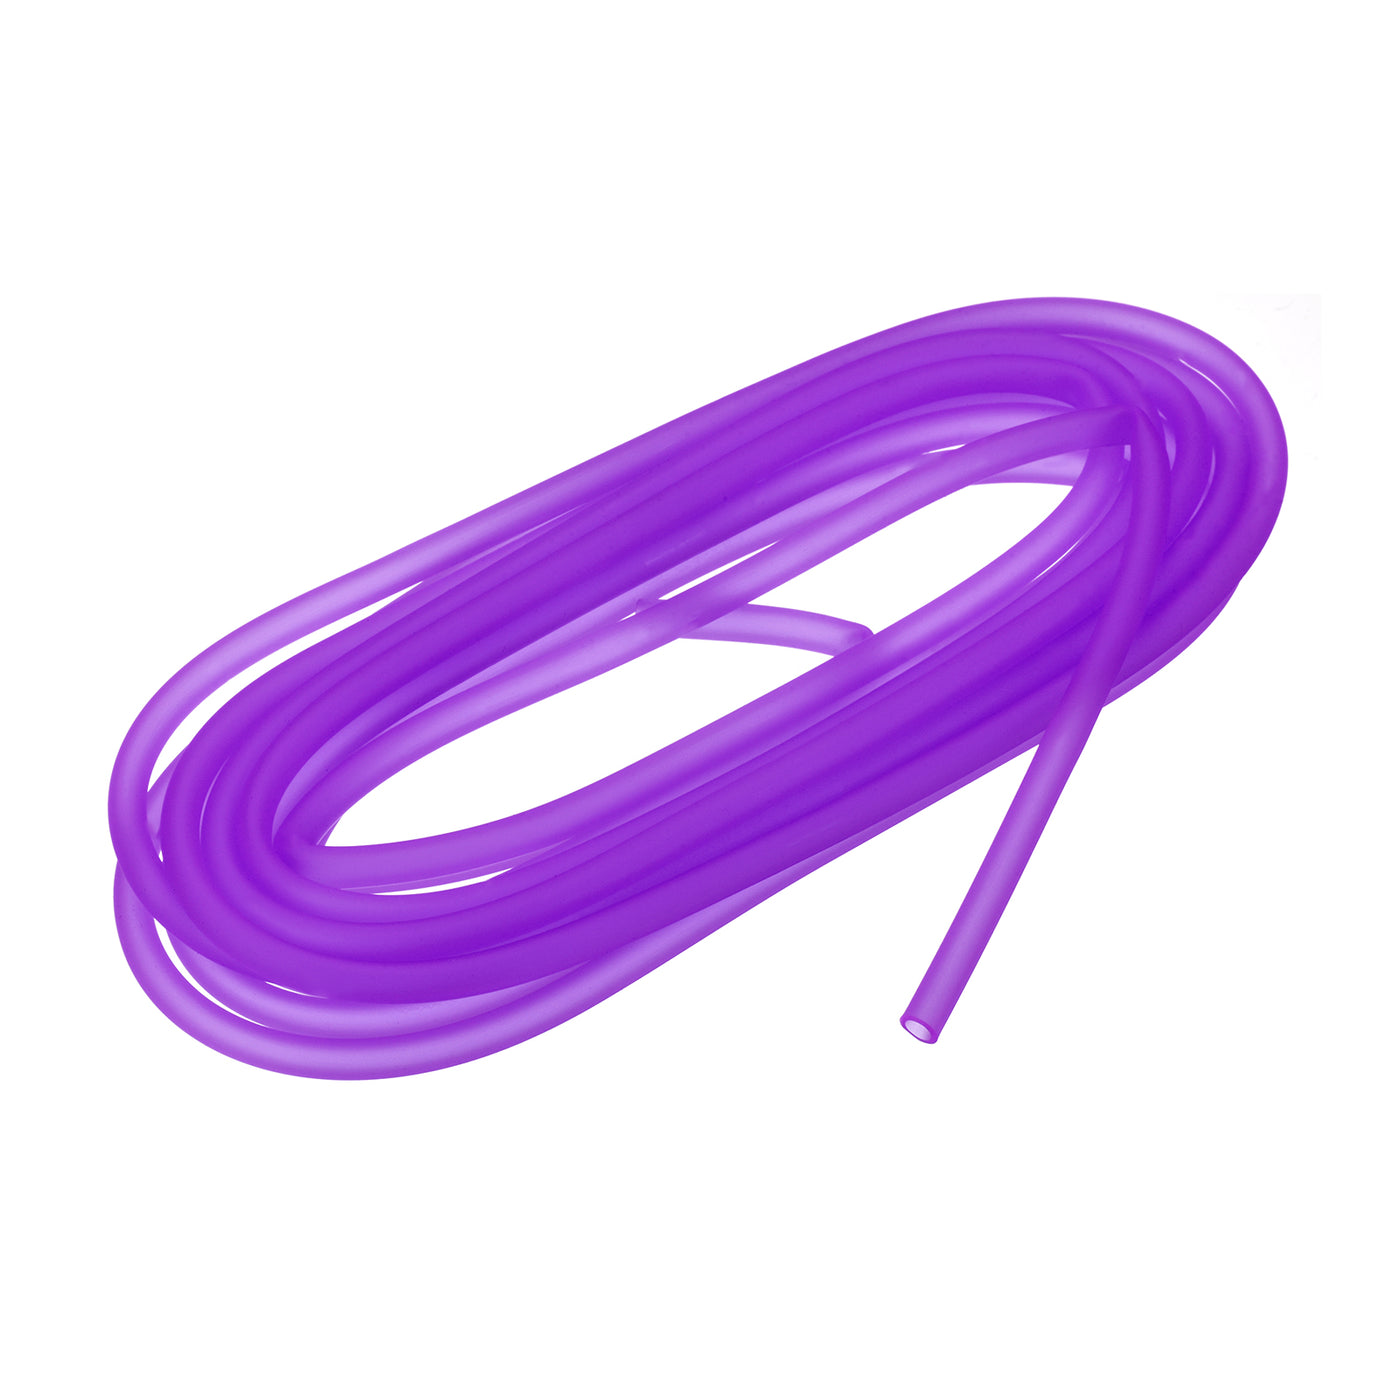 uxcell Uxcell Silicone Tubing 5/32" ID, 15/64" OD 1Pcs 13.12 Ft for Pump Transfer, Purple